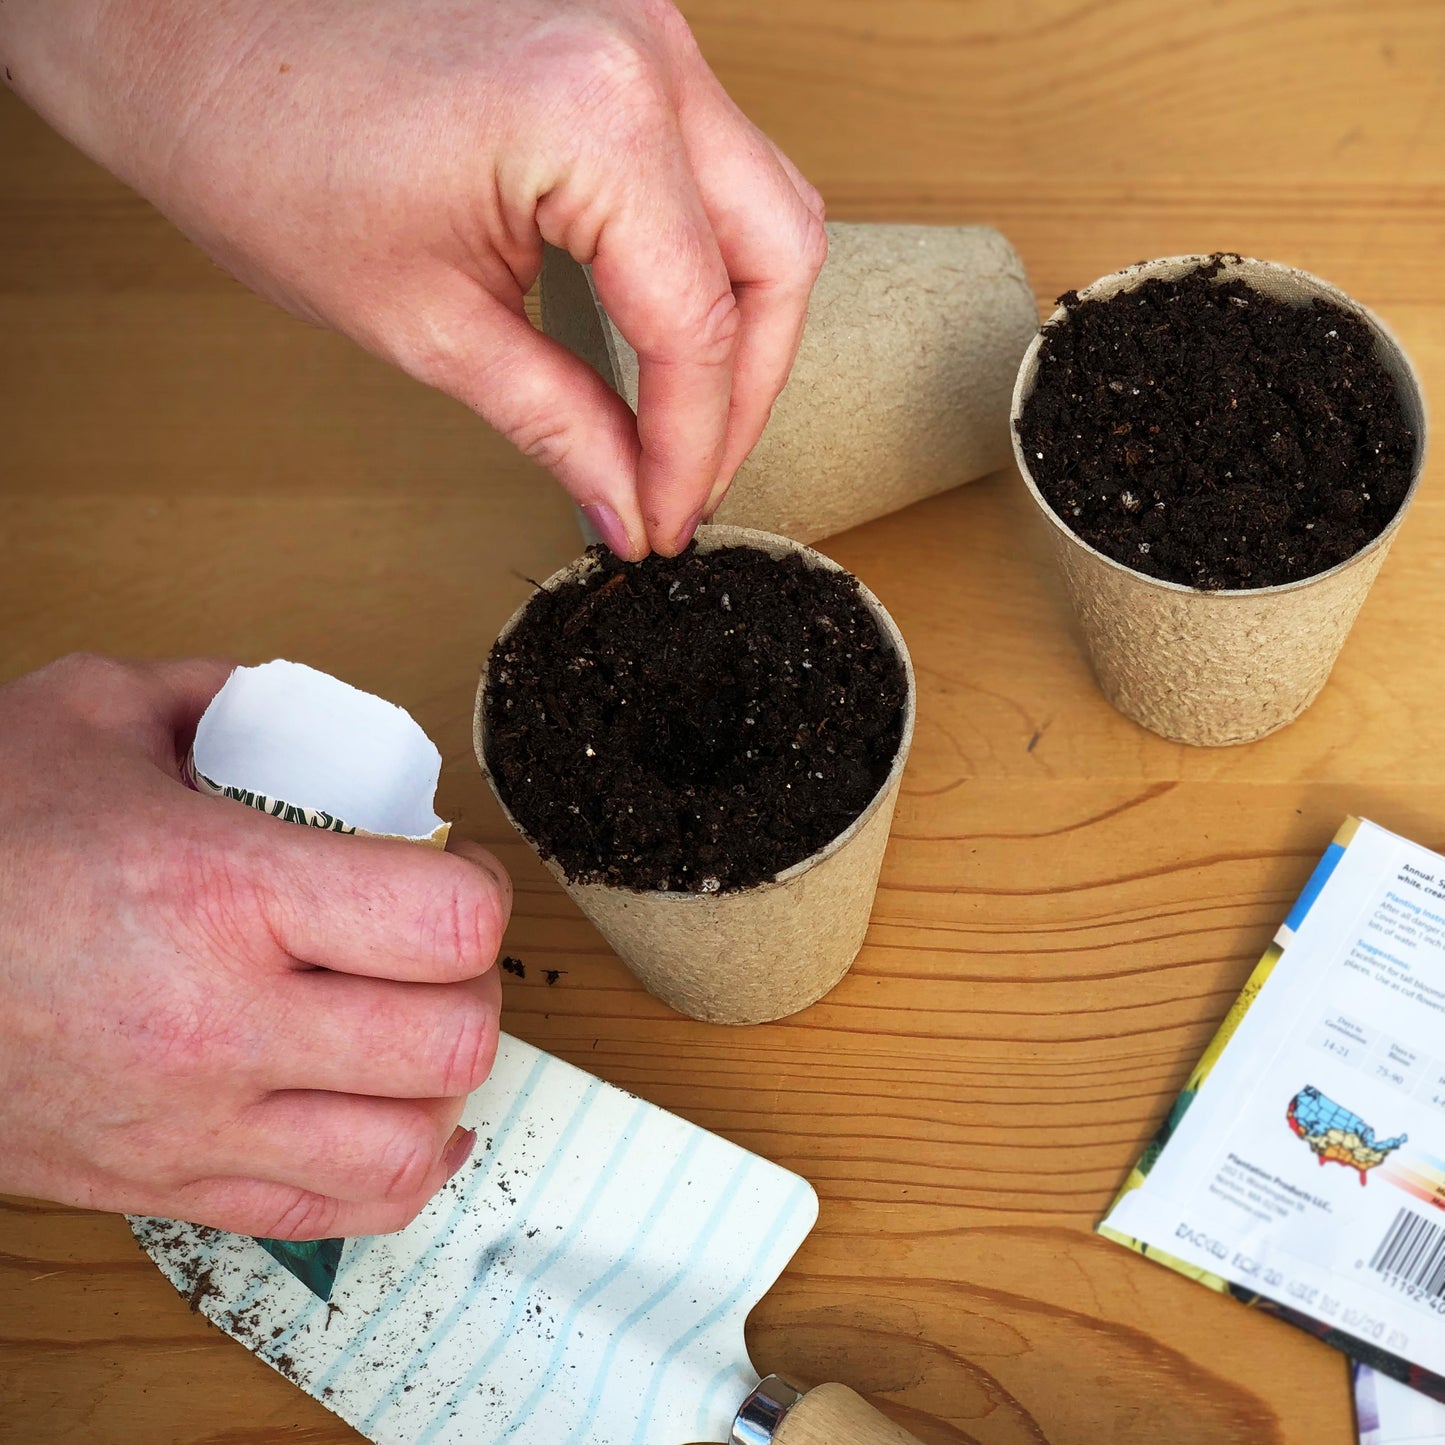 Sow your White Lisbon Bunching Onion Seeds into Jiffy biodegradable peat pots filled with Jiffy seed starting mix in order to get your seedlings off to the right start, transplant pot and all when ready.